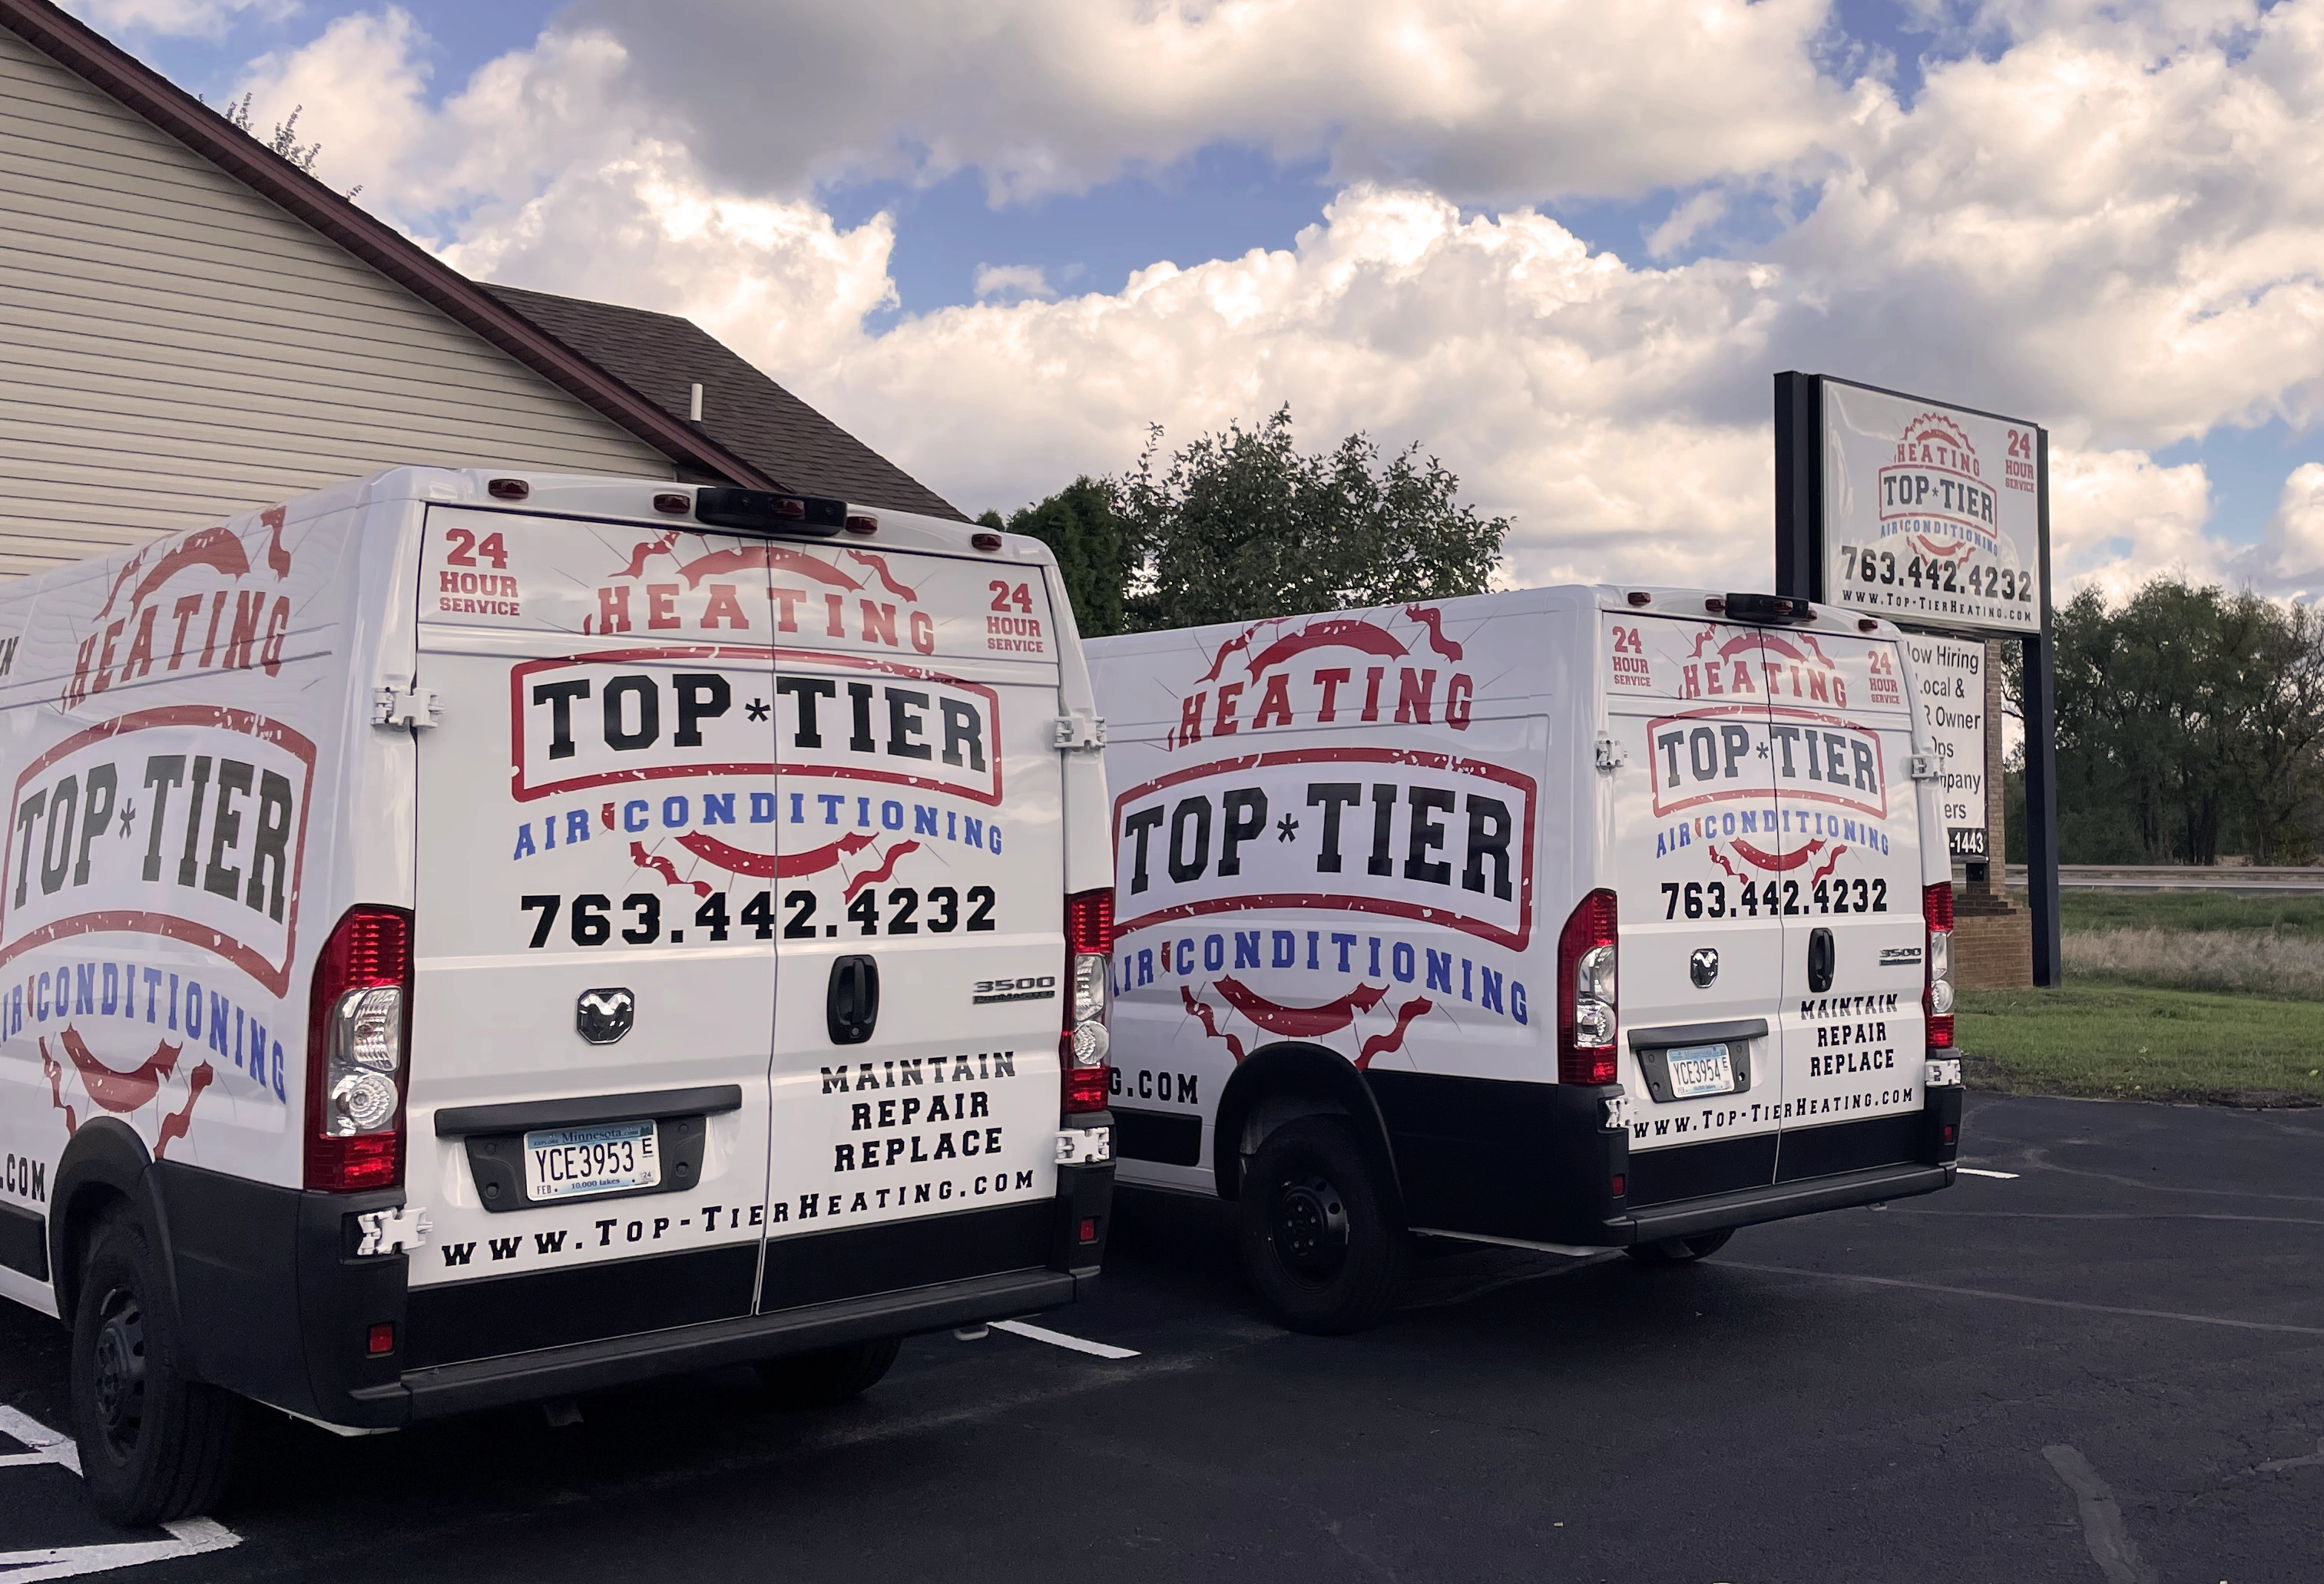 Allow Top Tier Heating and Air Conditioning  to repair your ductless ac in Blaine MN